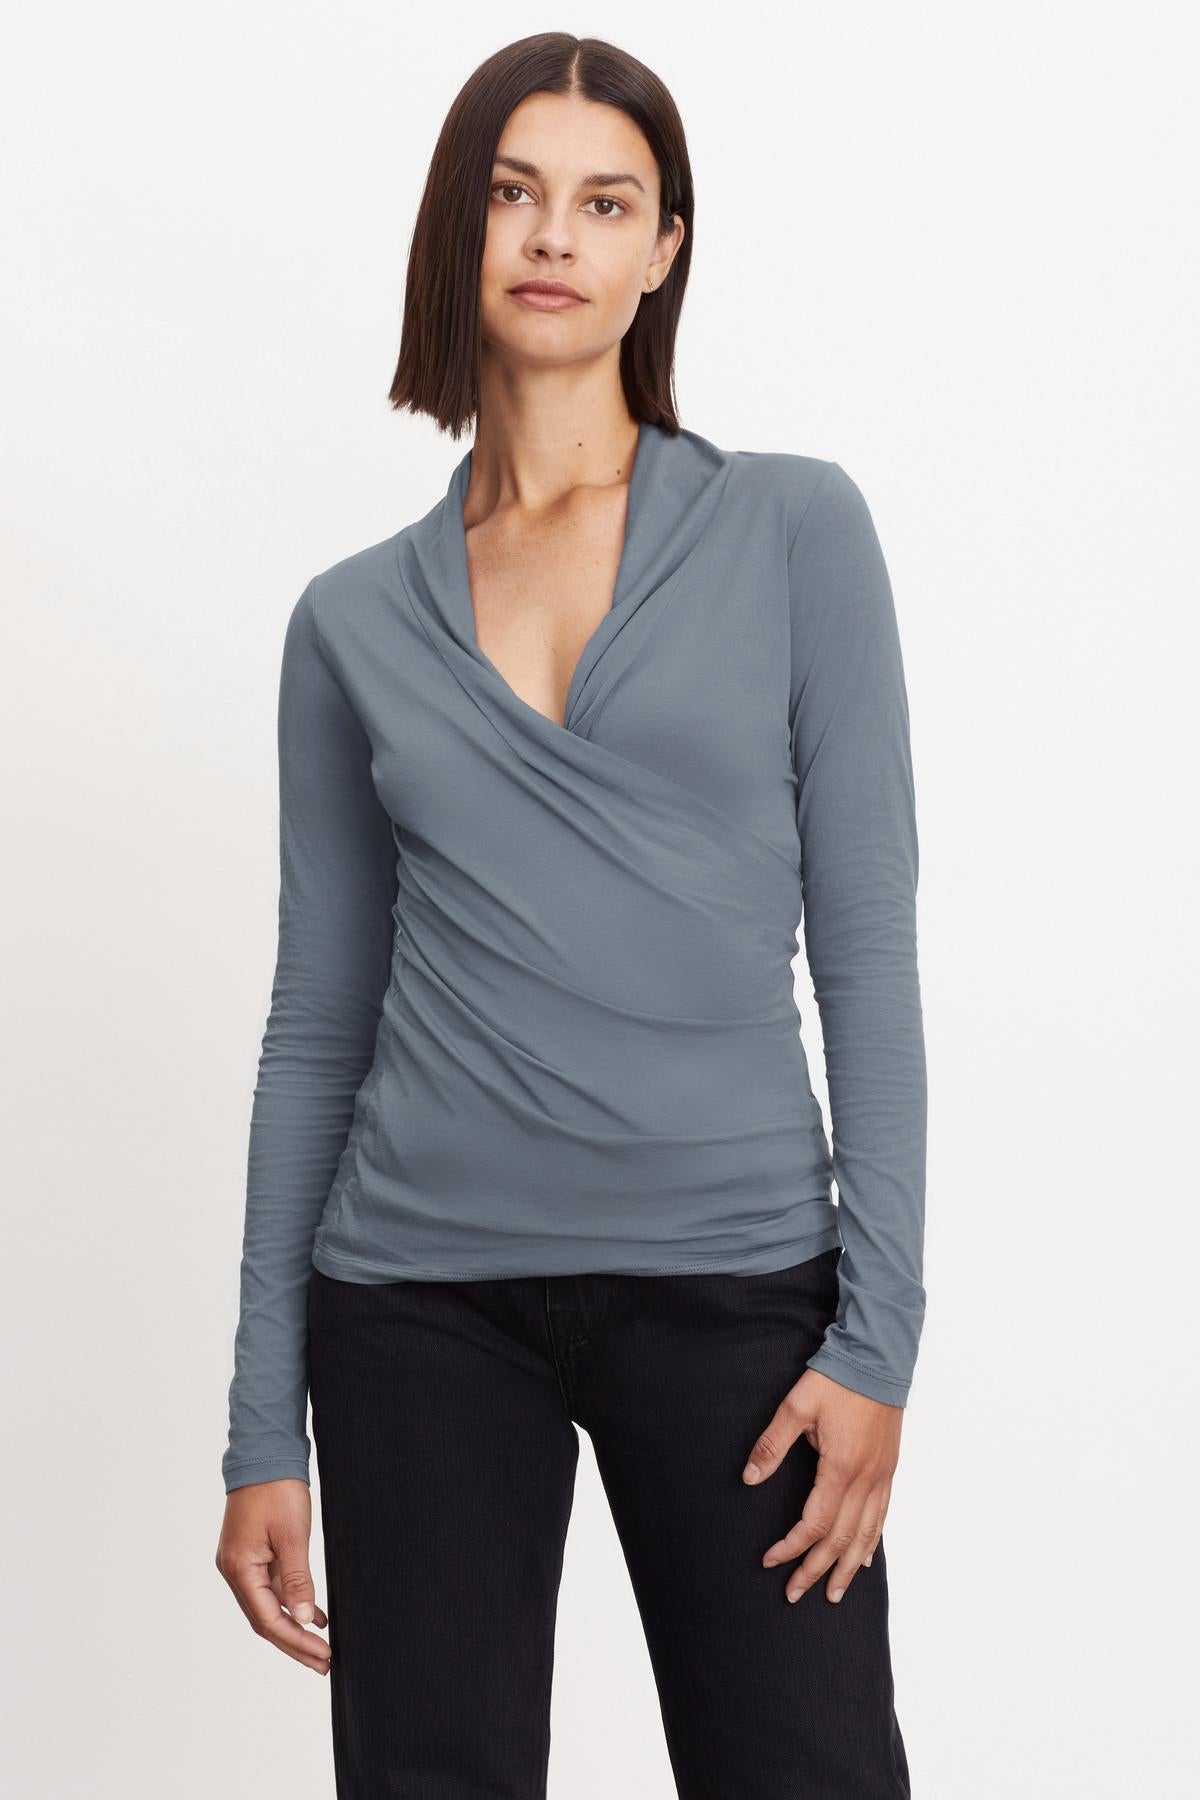 The model is wearing a Velvet by Graham & Spencer MERI WRAP FRONT FITTED TOP gray long-sleeved top with cross-over v-neck.-36094410588353